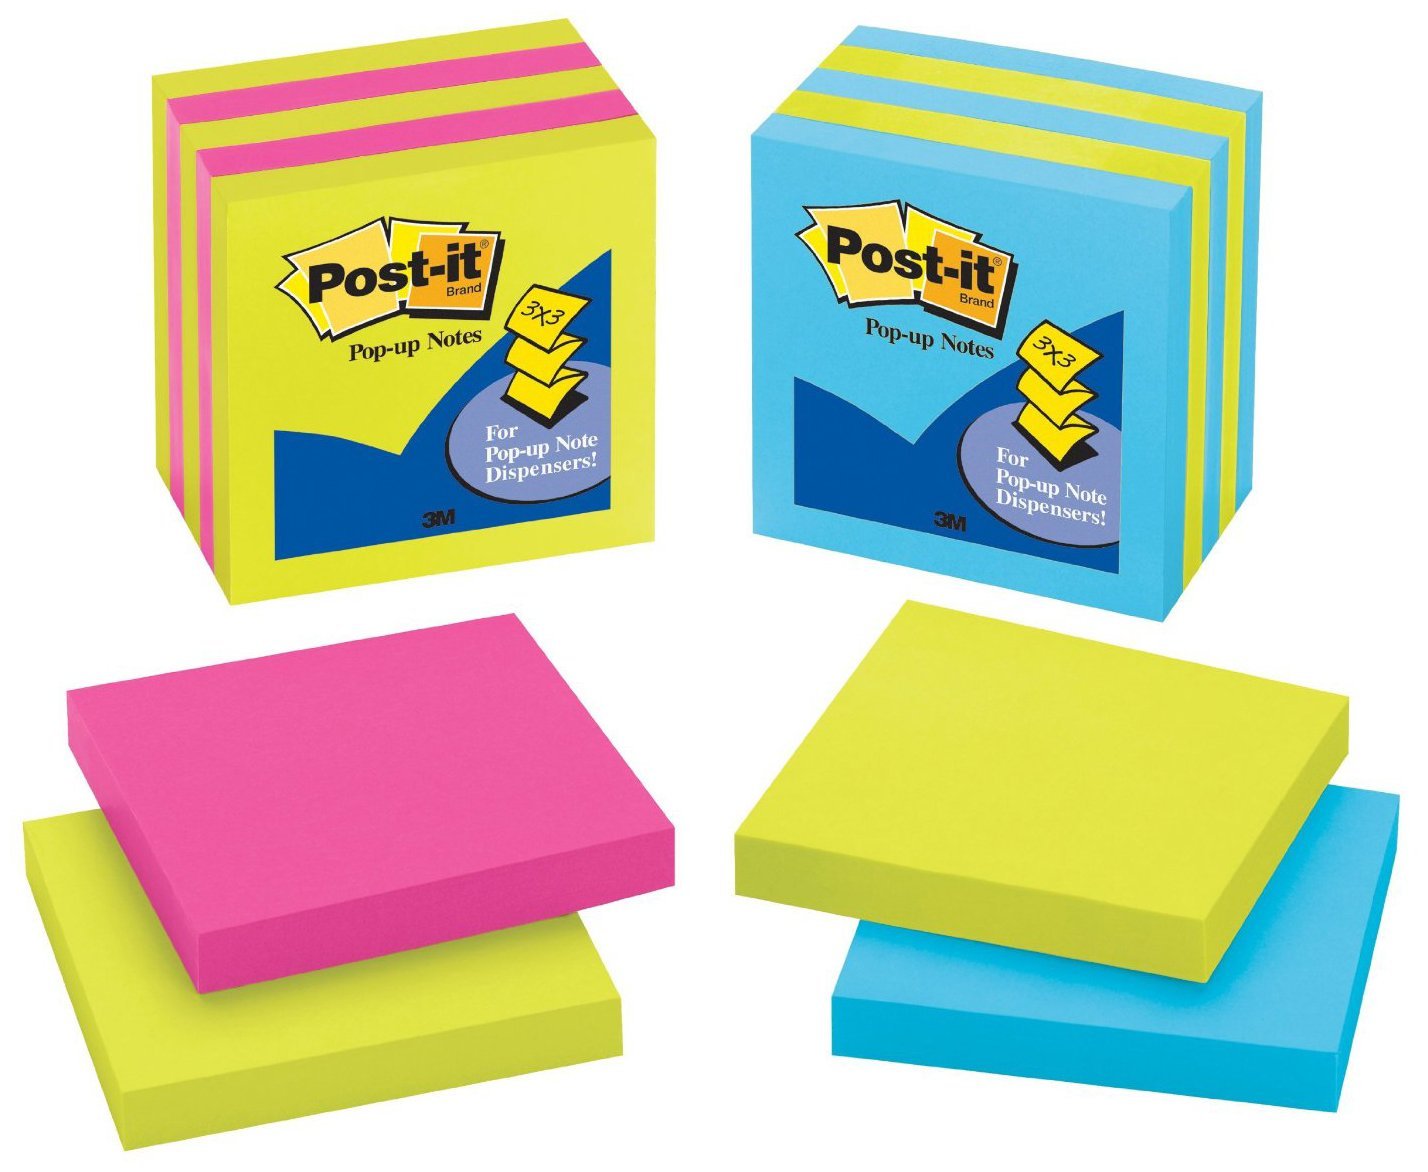 Post-it Pop-up Notes, 100 Sheets per Pad - Free Shipping